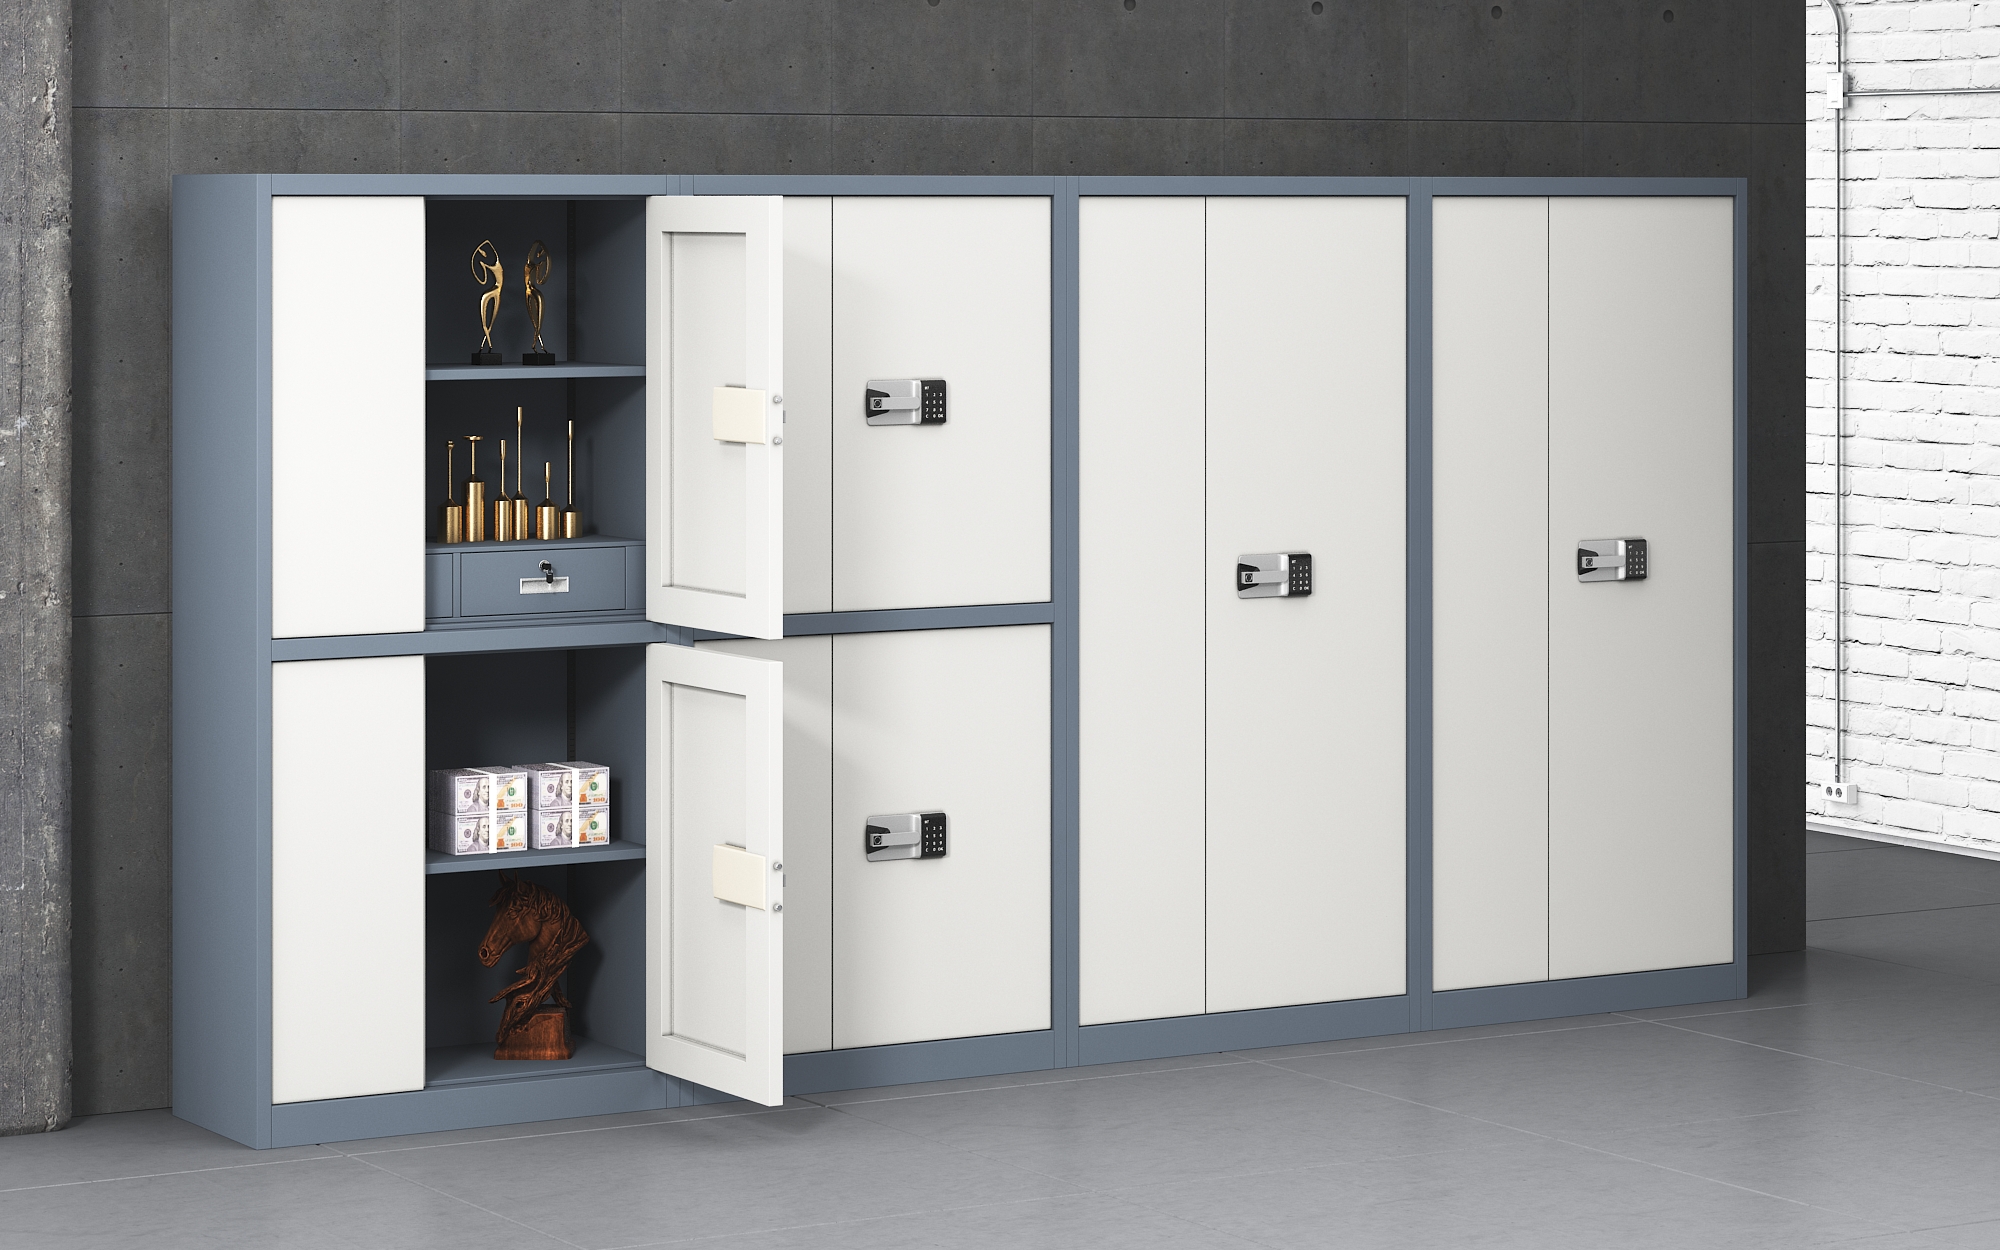 steel file cabinets be used in Banks